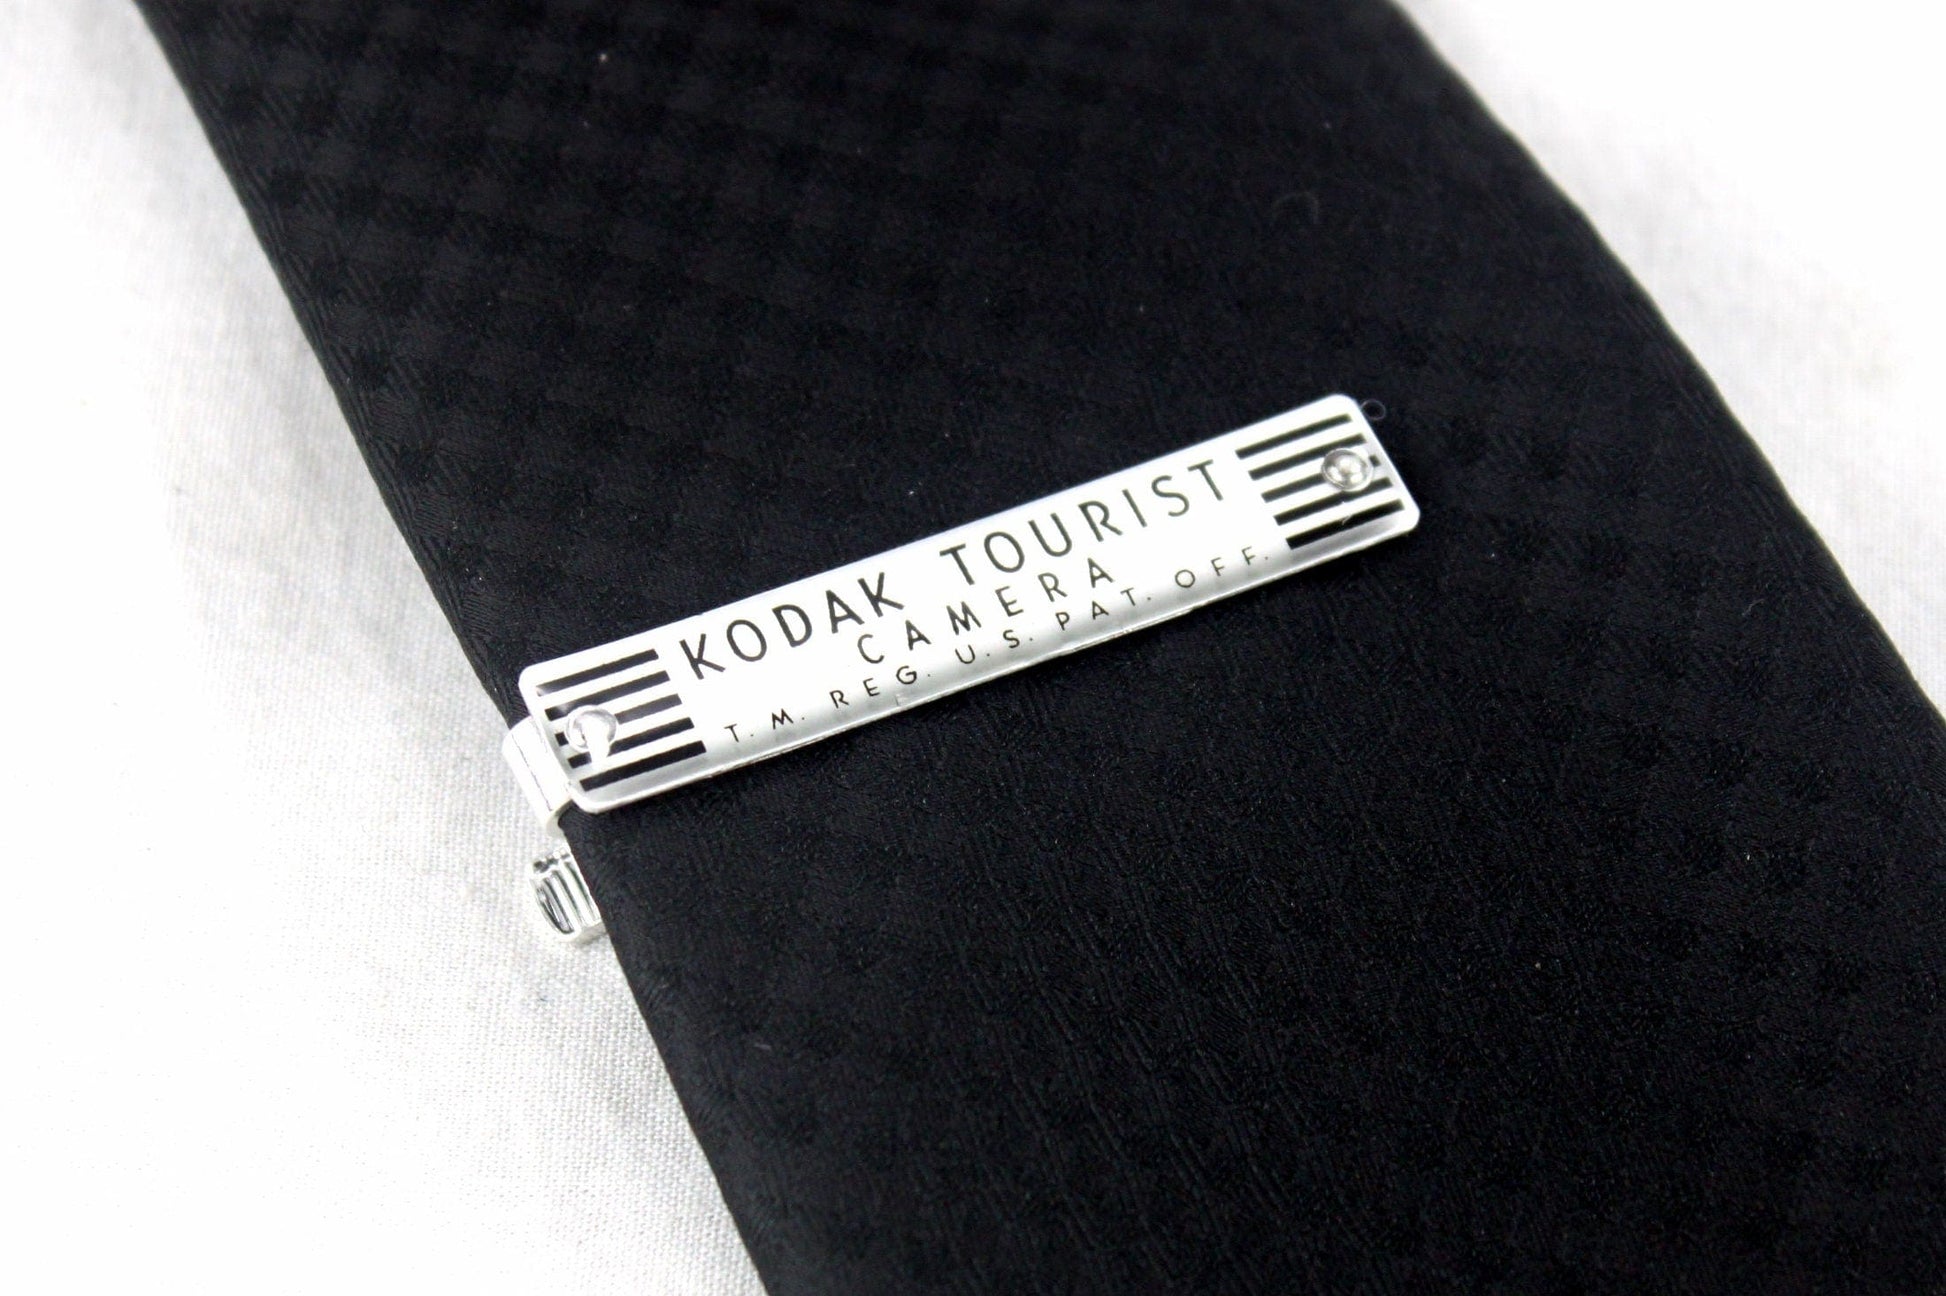 LightAndTimeArt Tie Clips Vintage Kodak Tie Clip, Tie Bar, Gift for him, photographer gift, Handmade in USA, Eco-friendly Statement Jewelry for him